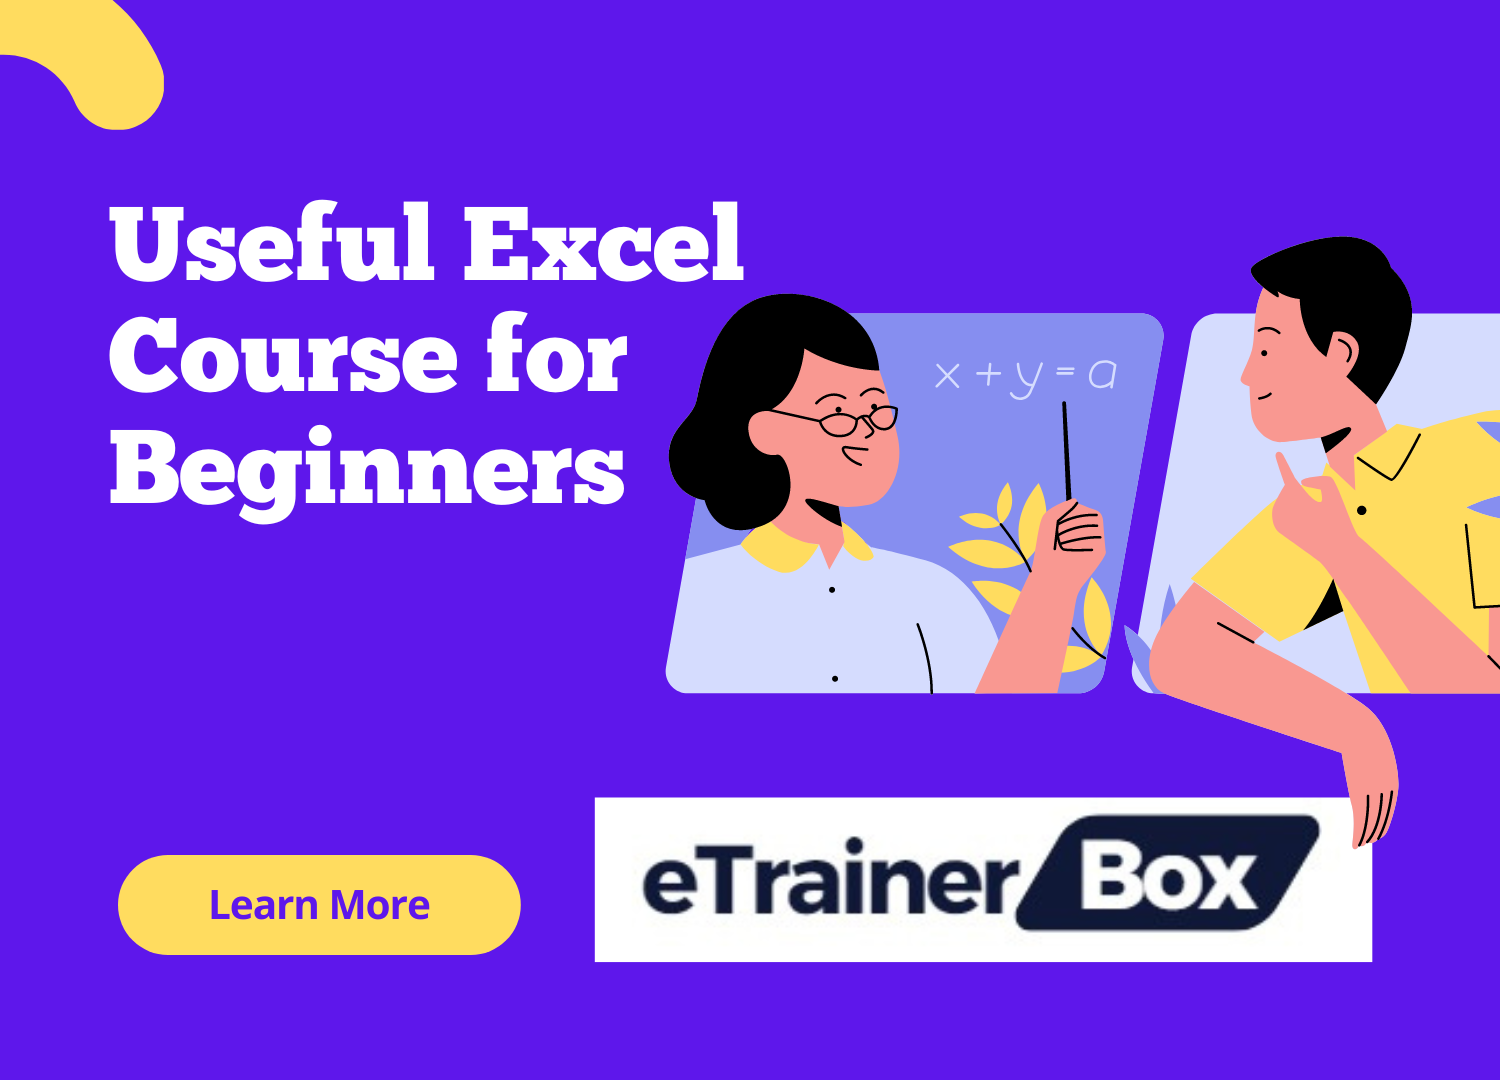 Useful excel course for Beginners